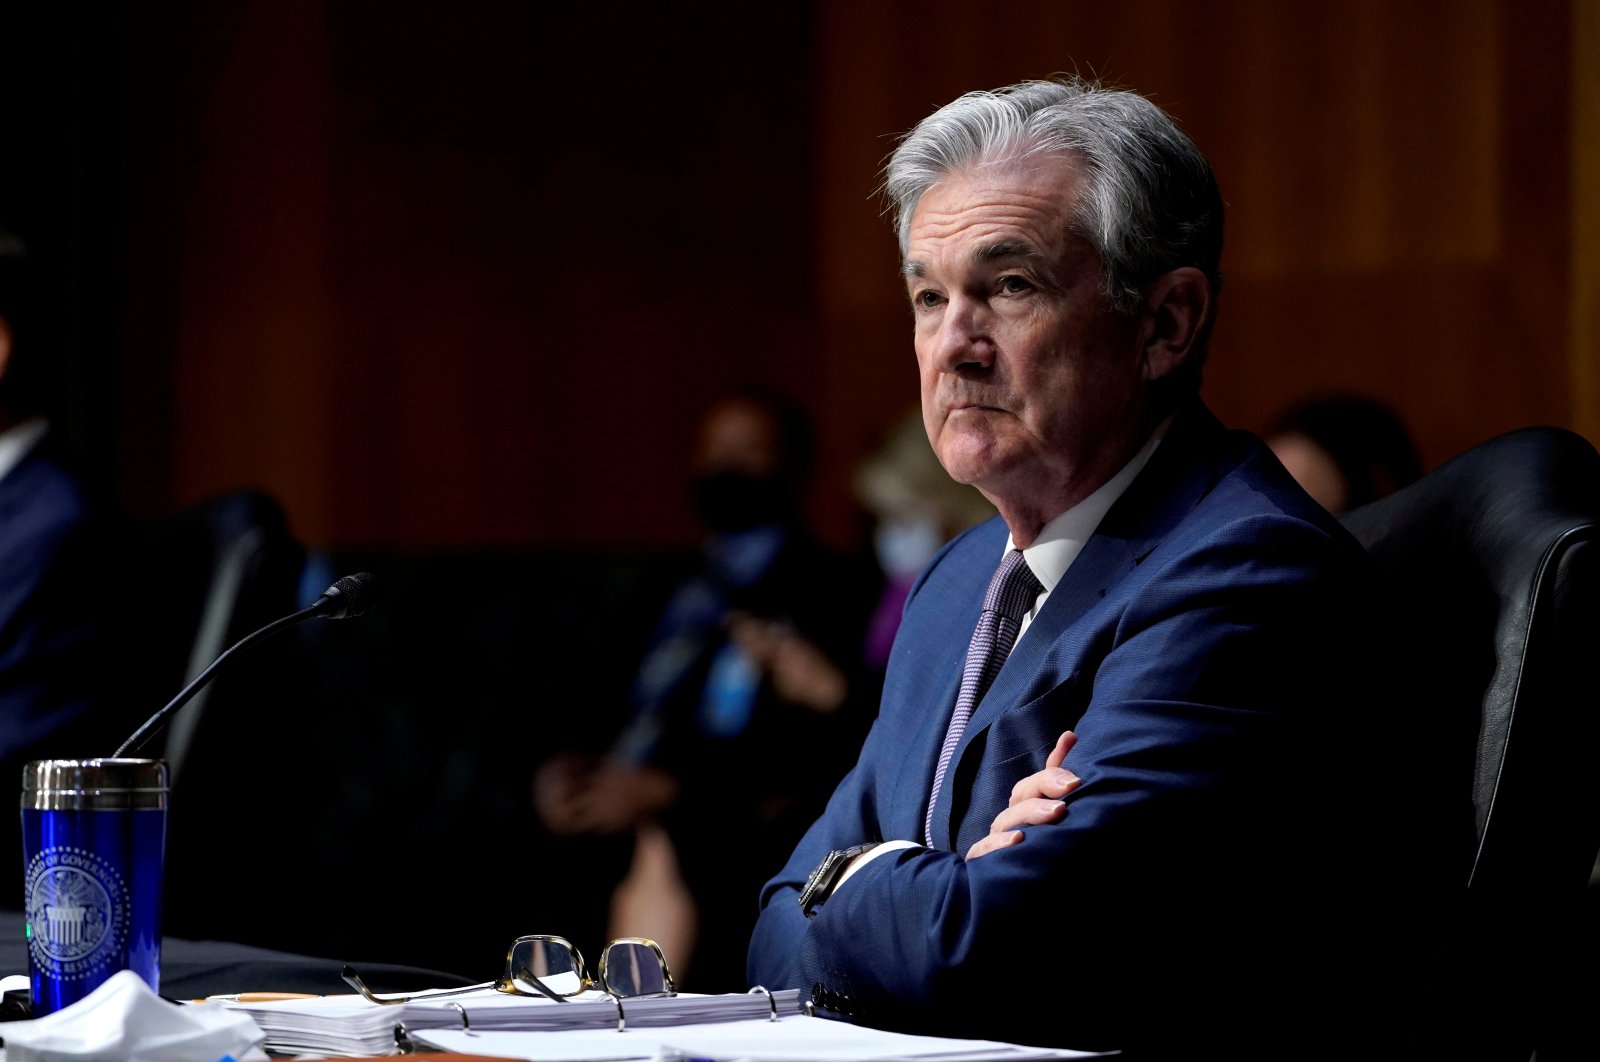 Chairman of the Federal Reserve (Fed) Jerome Powell listens during a Senate Banking Committee hearing on Capitol Hill in Washington, U.S., Dec. 1, 2020. (Reuters Photo)